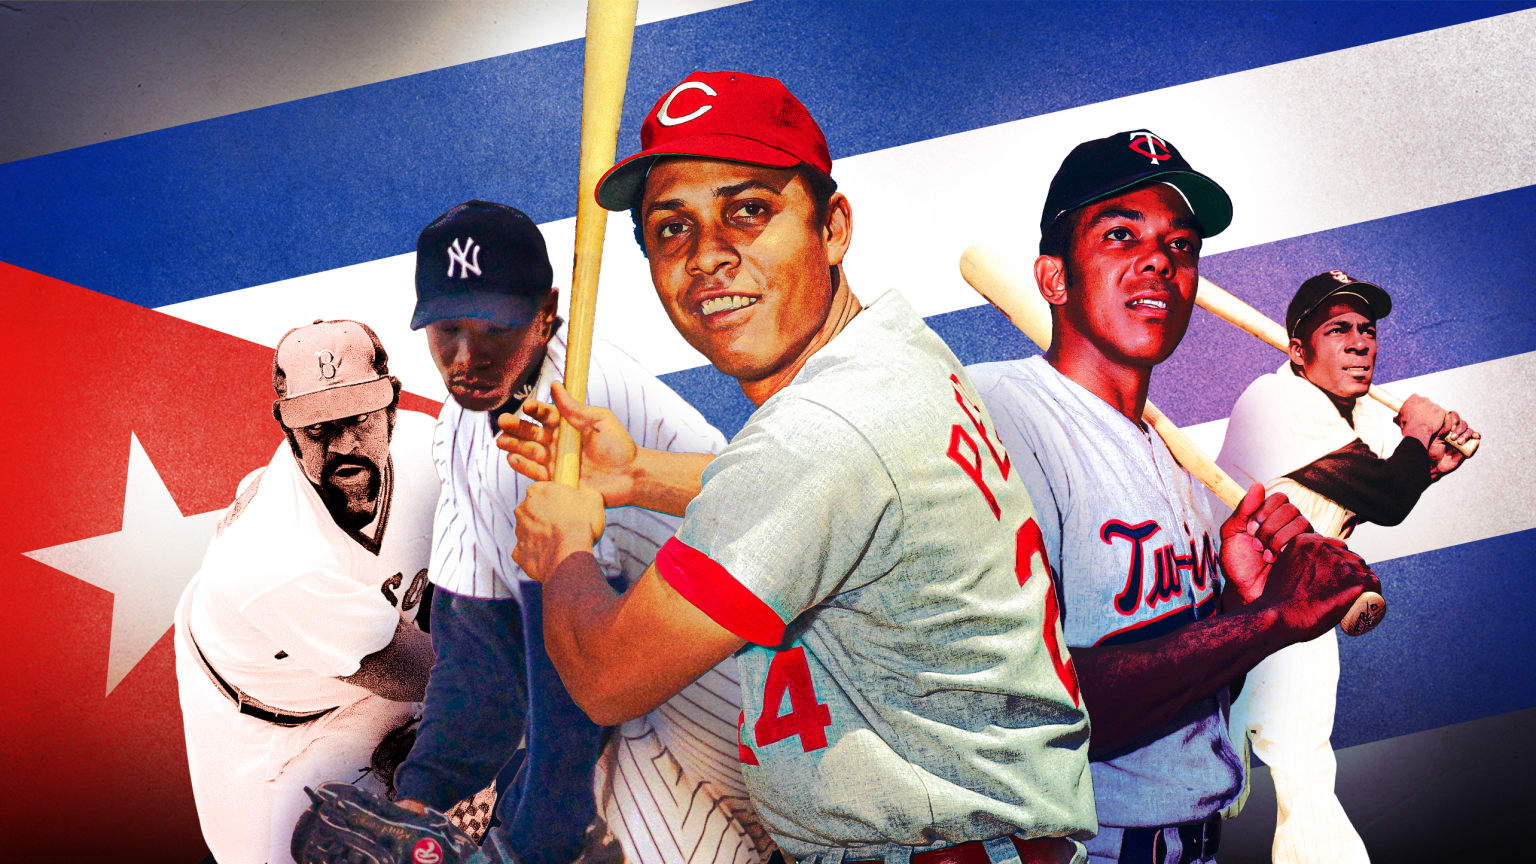 Five baseball players superimposed over the Cuban flag